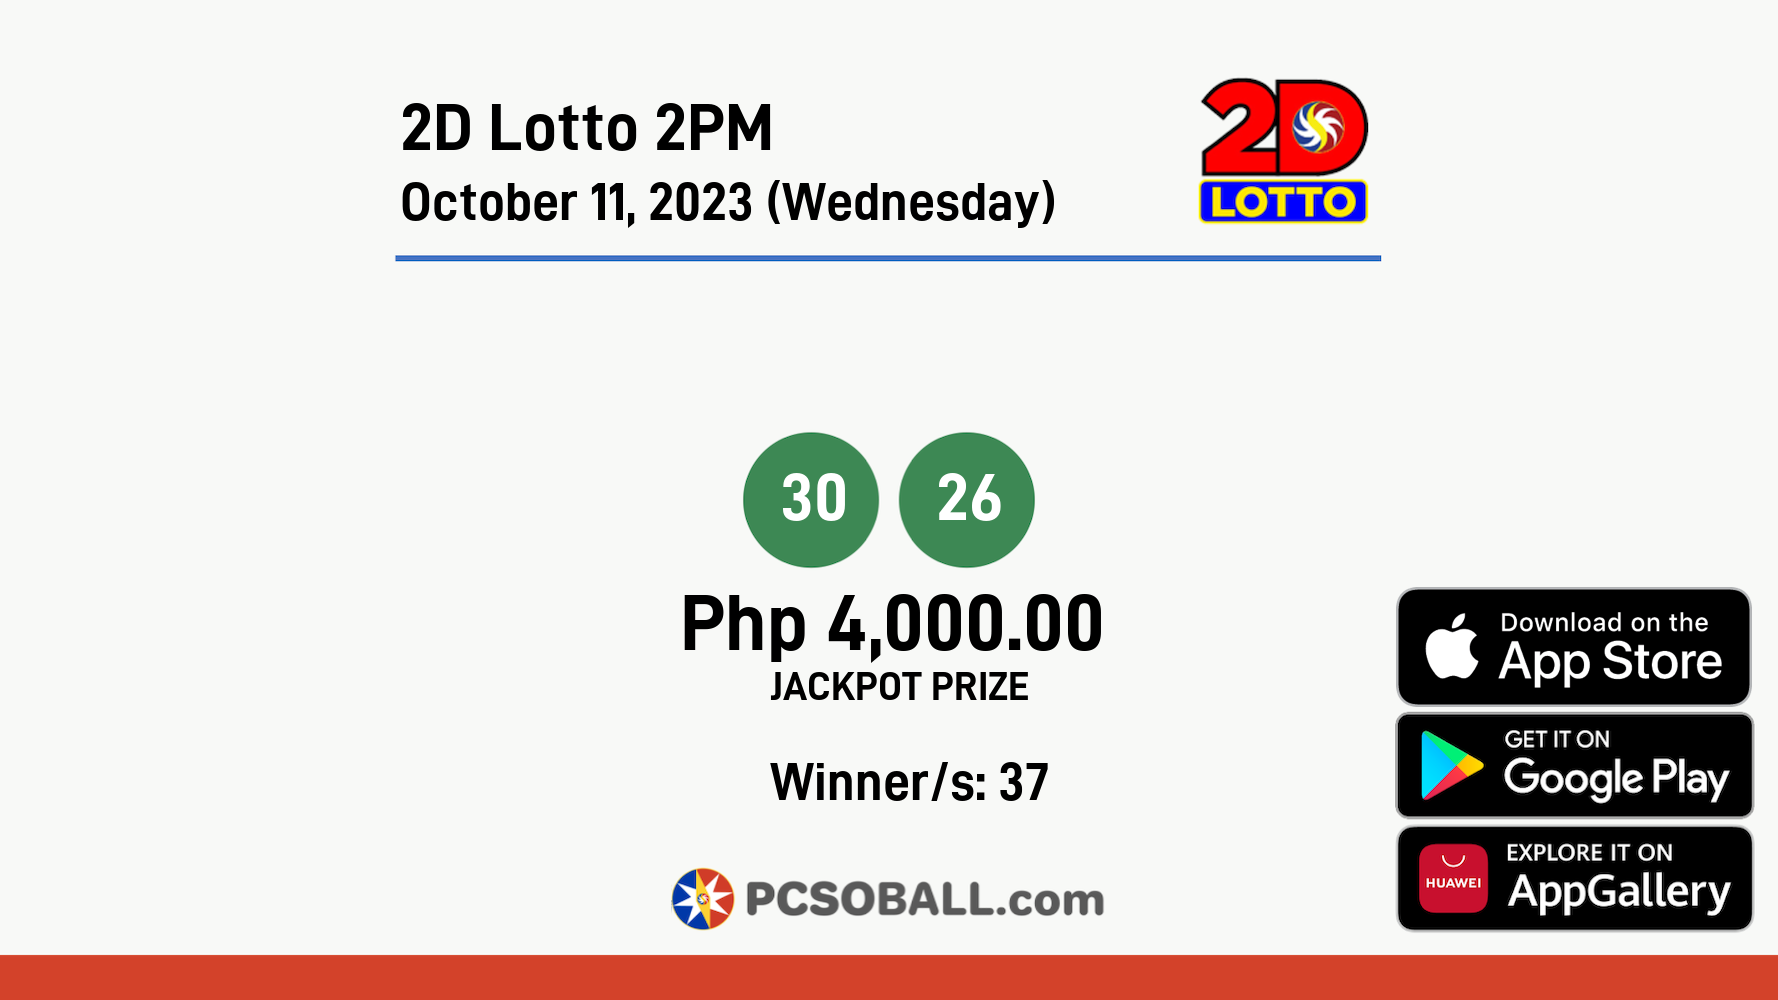 2D Lotto 2PM October 11, 2023 (Wednesday) Result